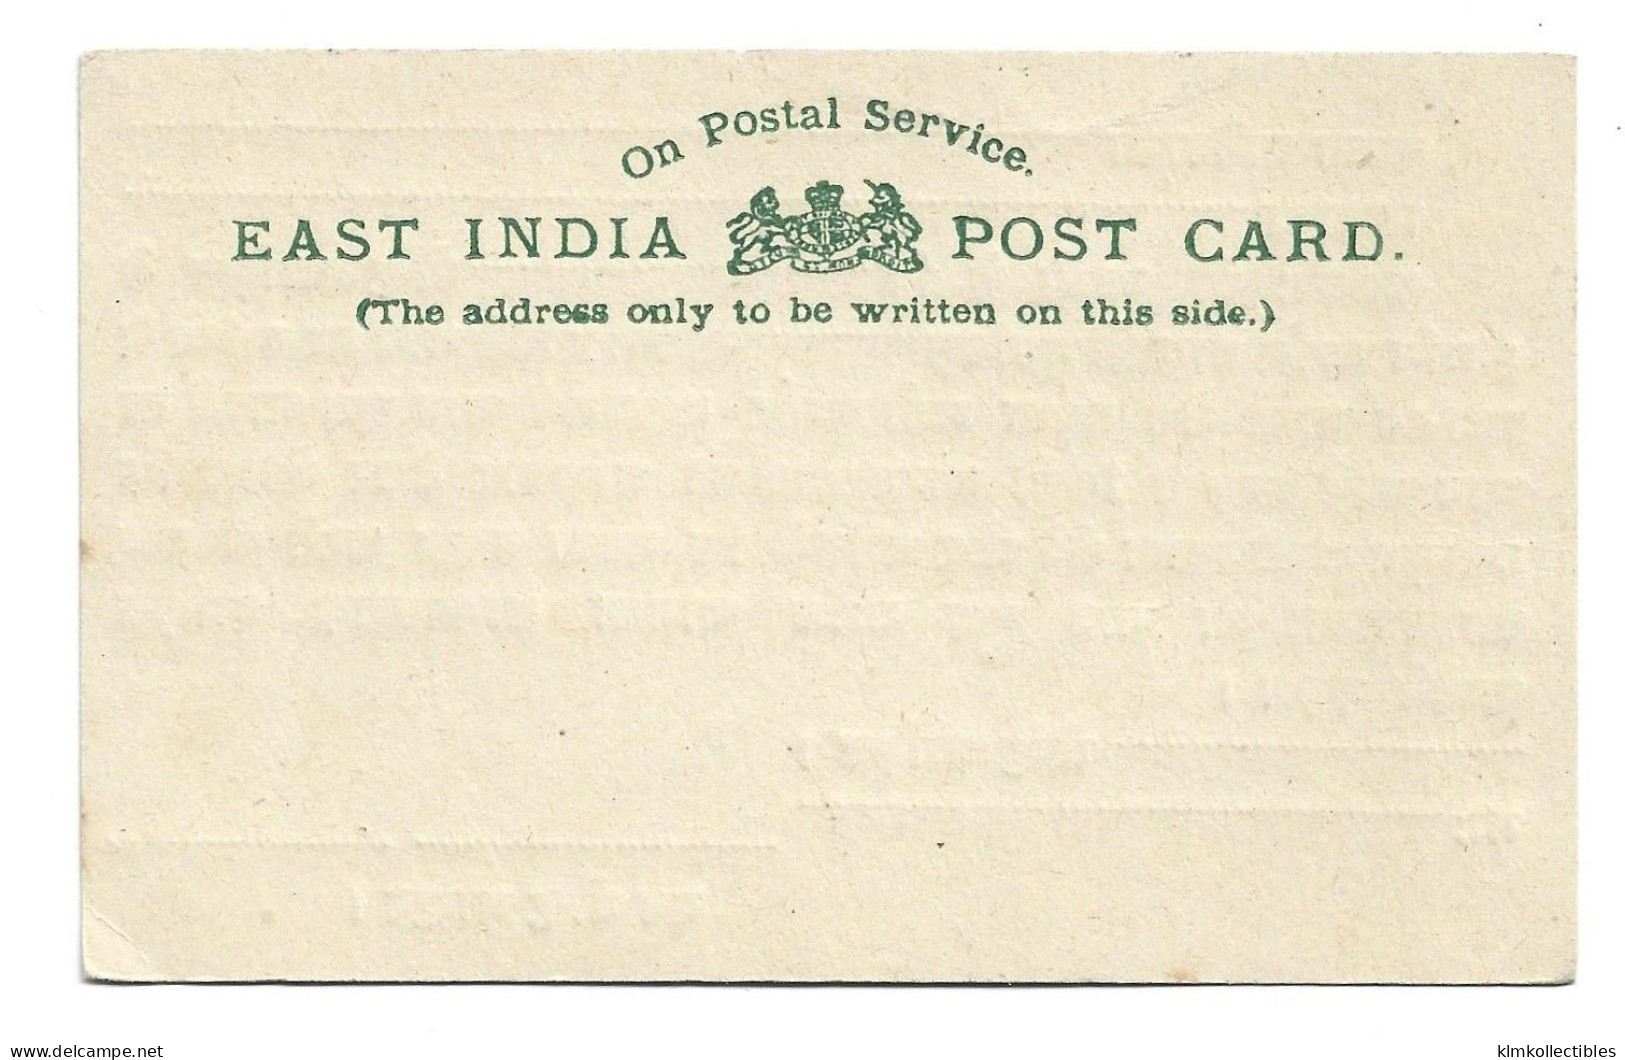 GREAT BRITAIN COLONIES EAST INDIA - UNUSED POSTAL STATIONERY MONEY ORDER - 1854 East India Company Administration